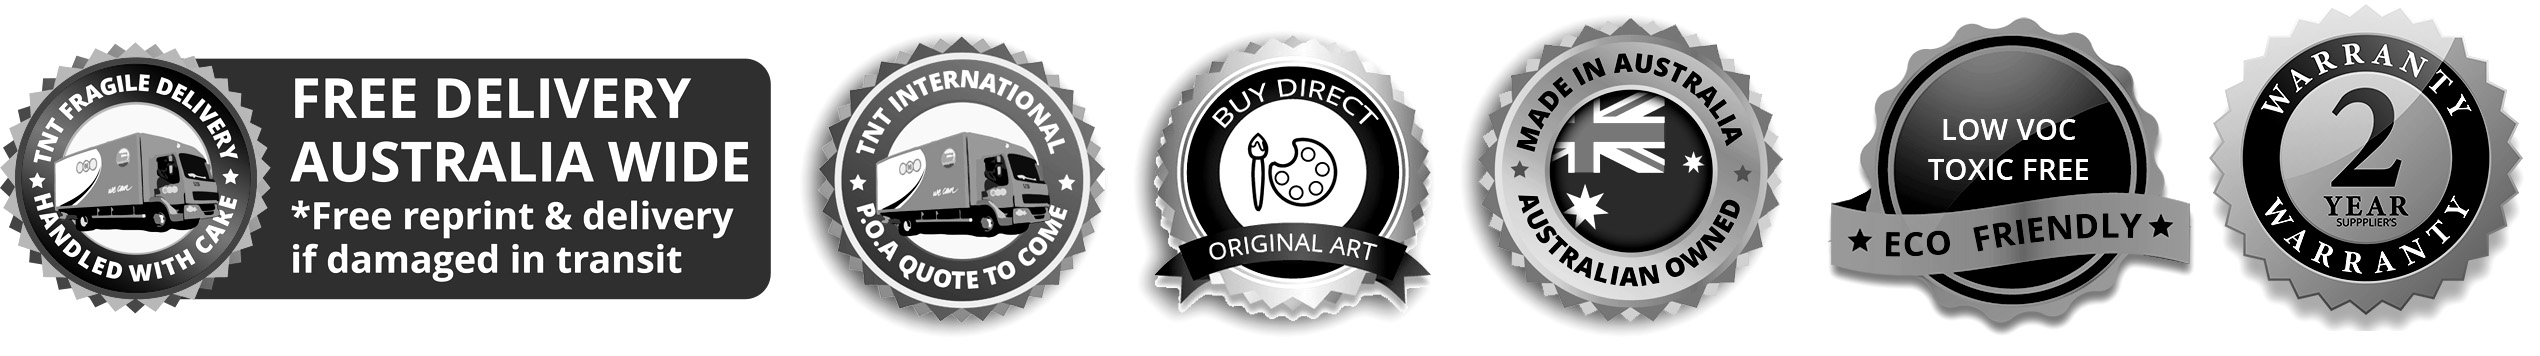 Warranty. Free Delivery Australia Wide. Low-VOC. Australian Made Banner Icons